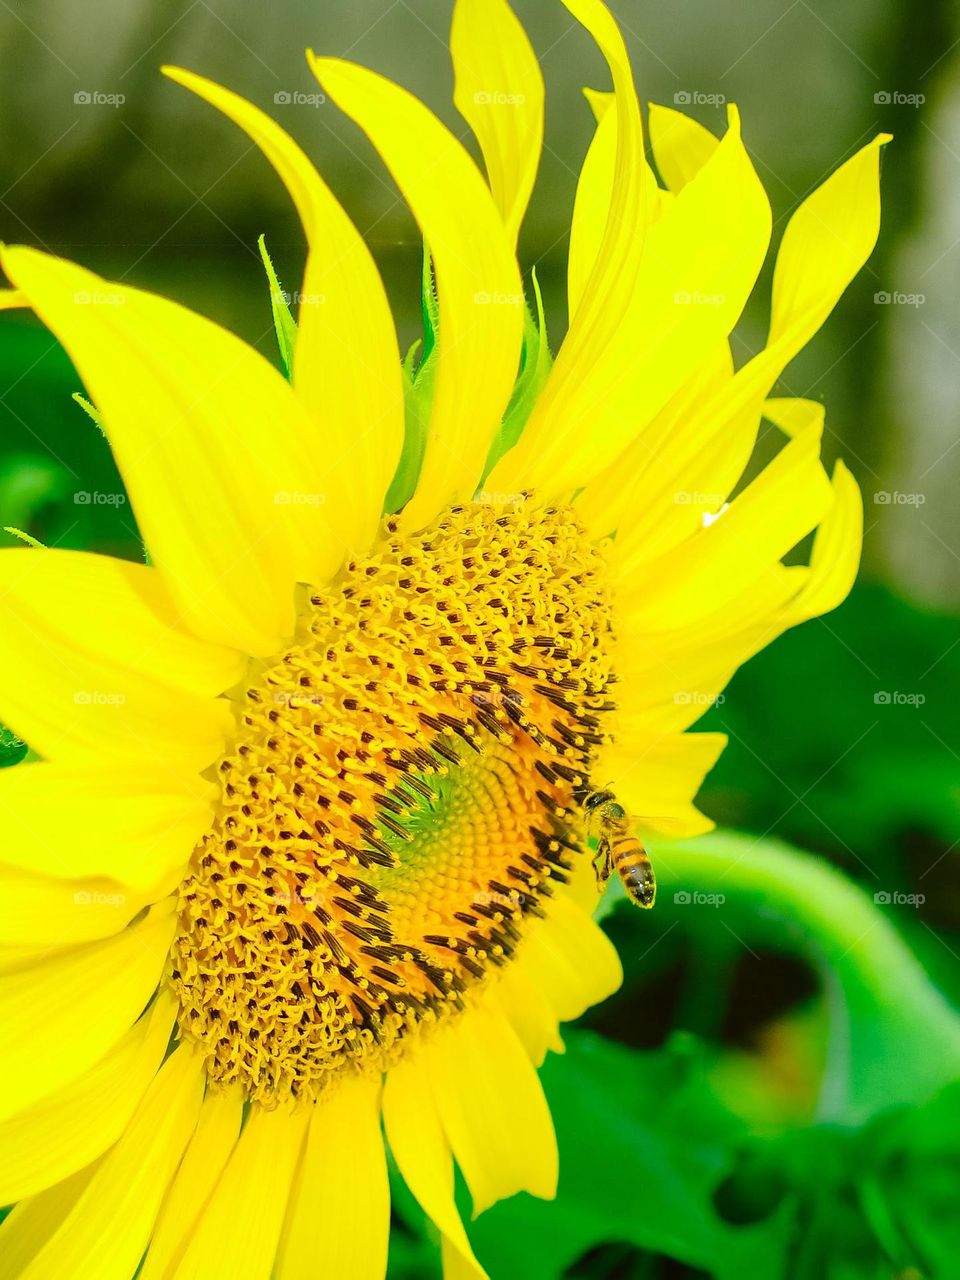 Bee flying towards a sunflower, little insect hovering and pollinating. Beautiful macro shot at the garden!